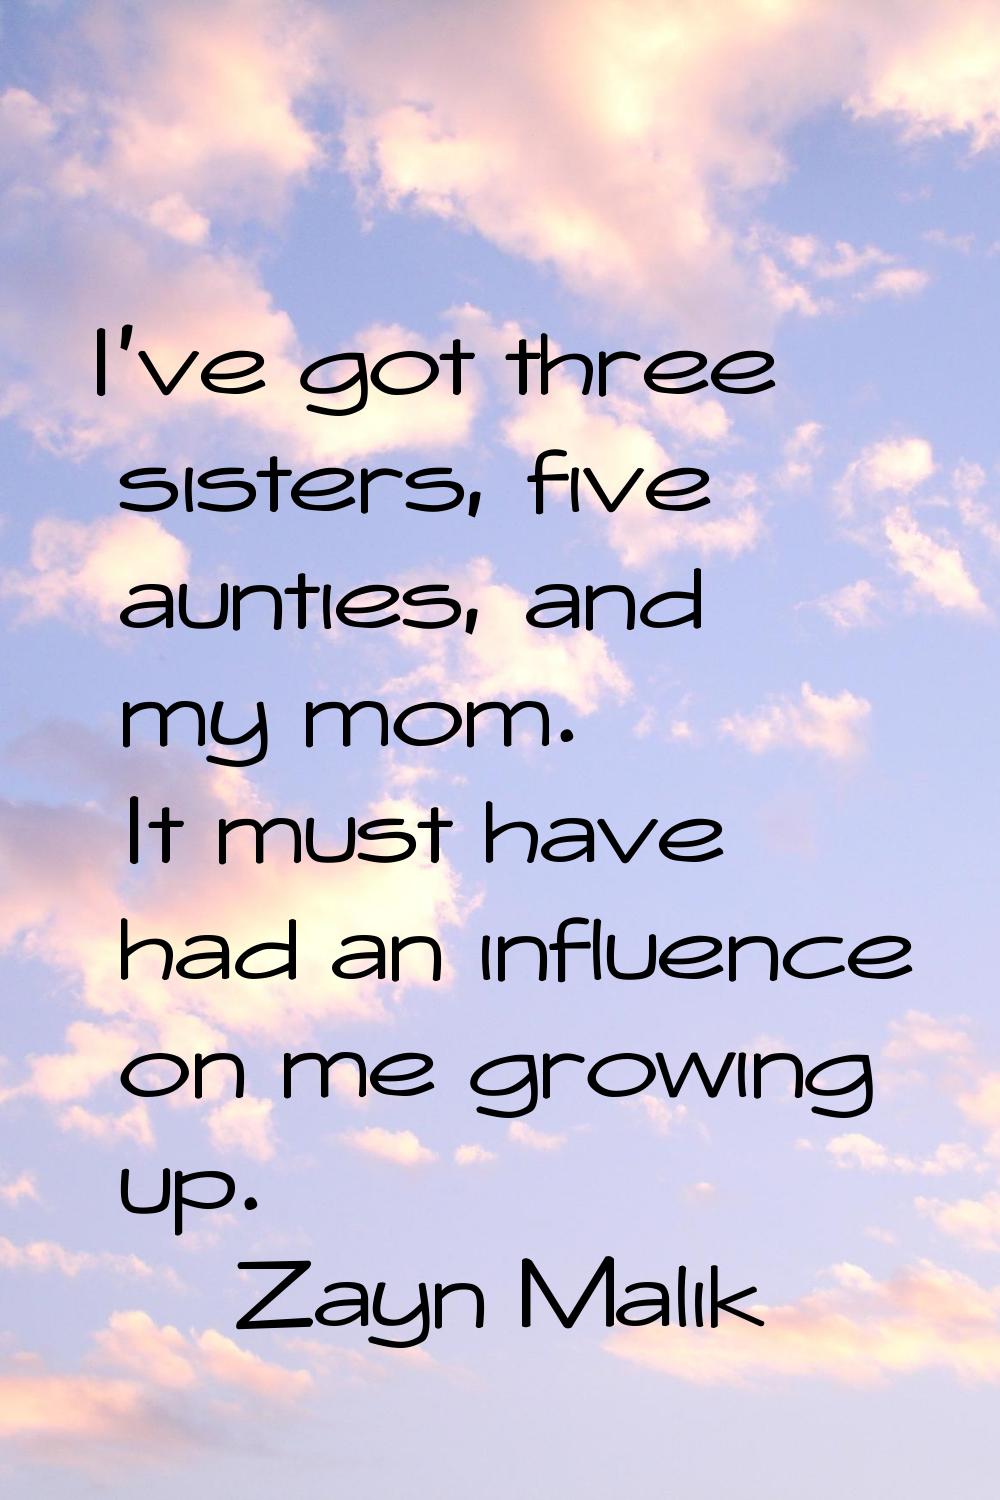 I've got three sisters, five aunties, and my mom. It must have had an influence on me growing up.